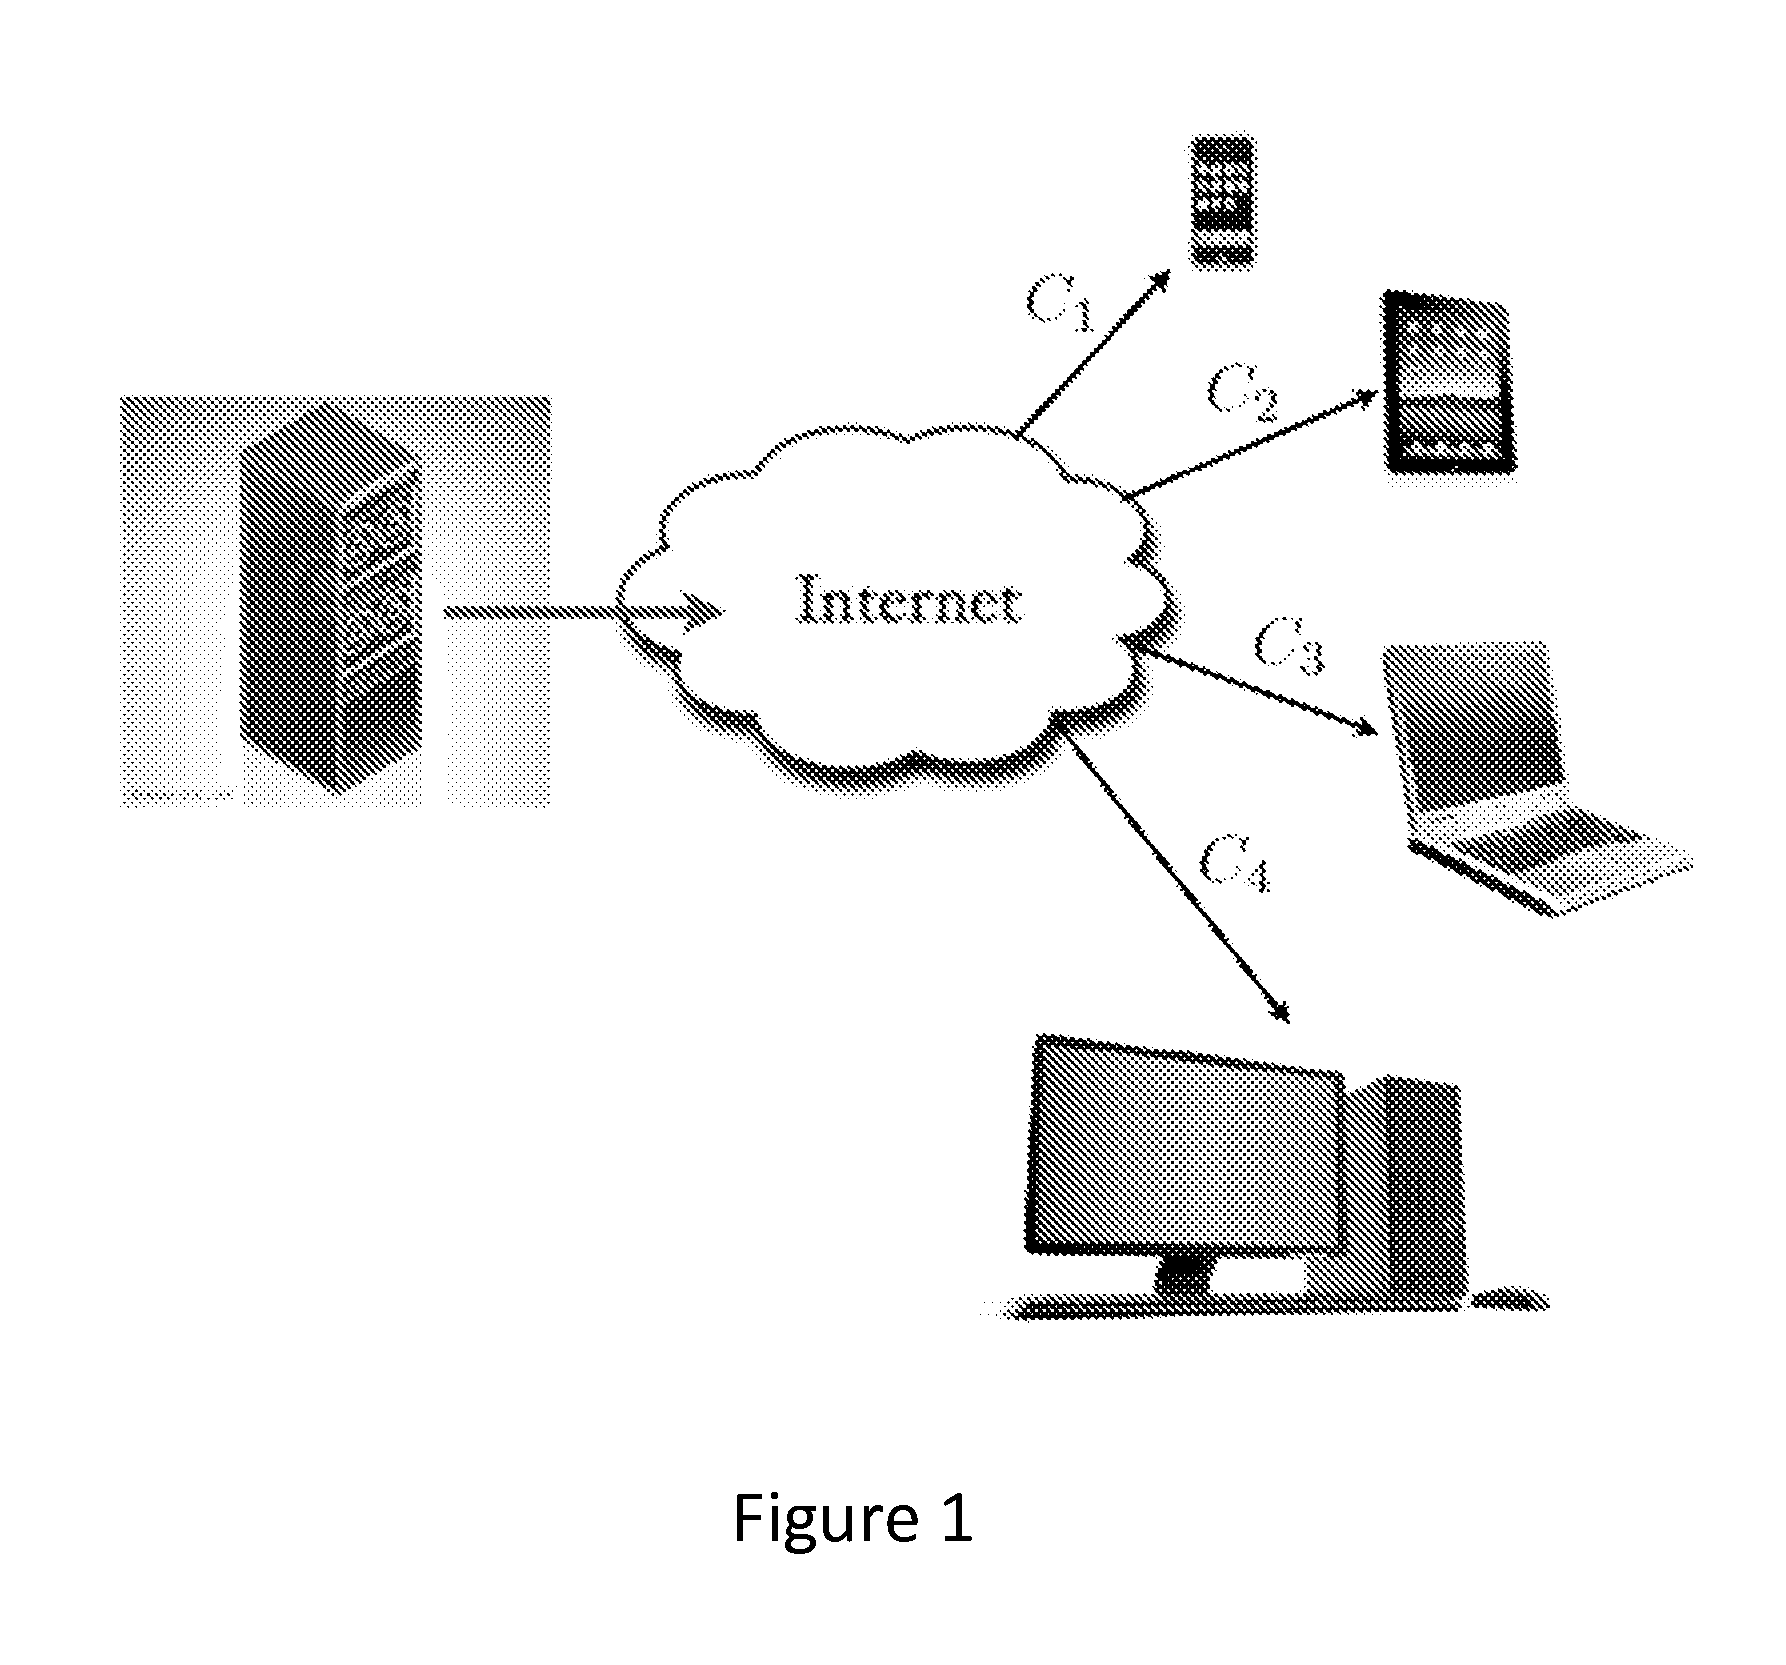 System and method for lossy source-channel coding at the application layer